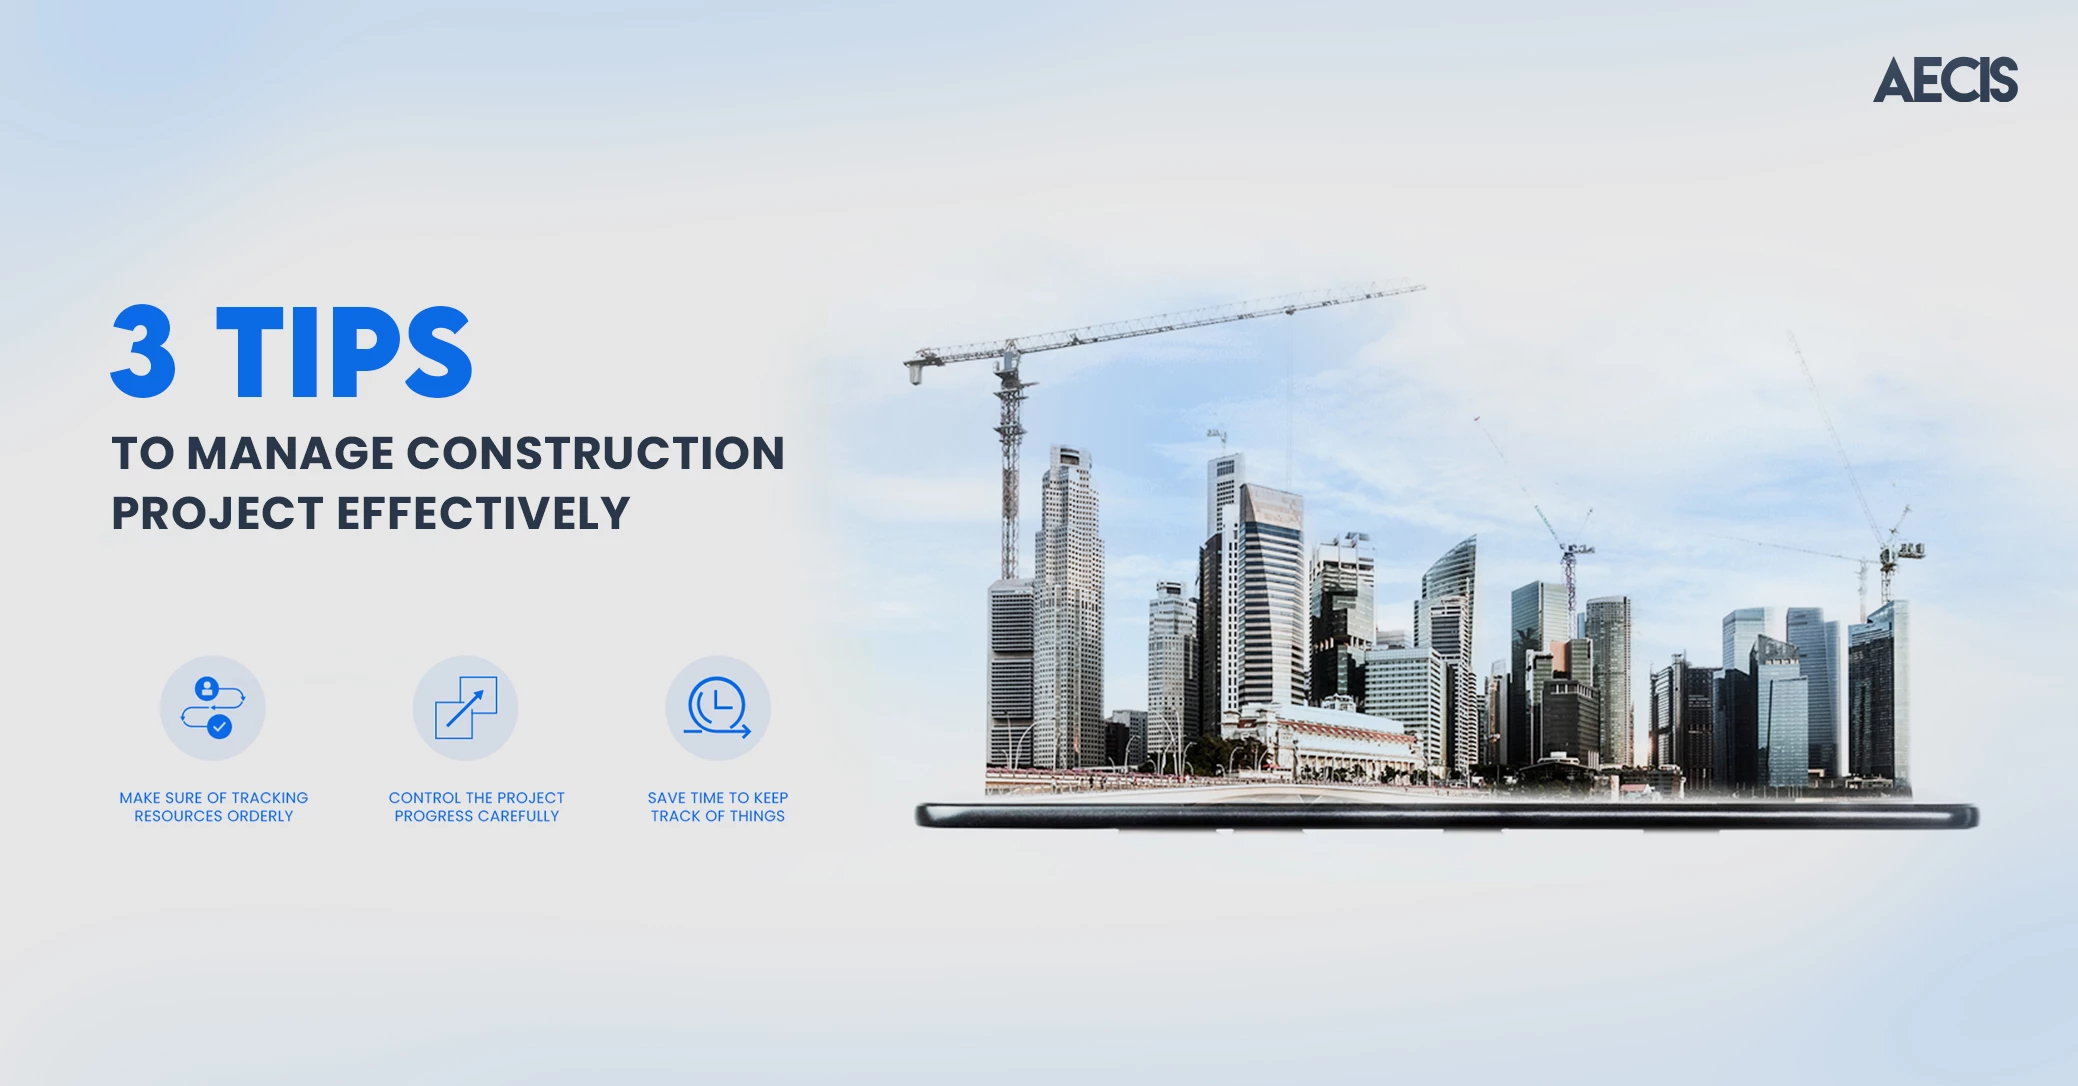 Discover 3 tips to manage construction project effectively